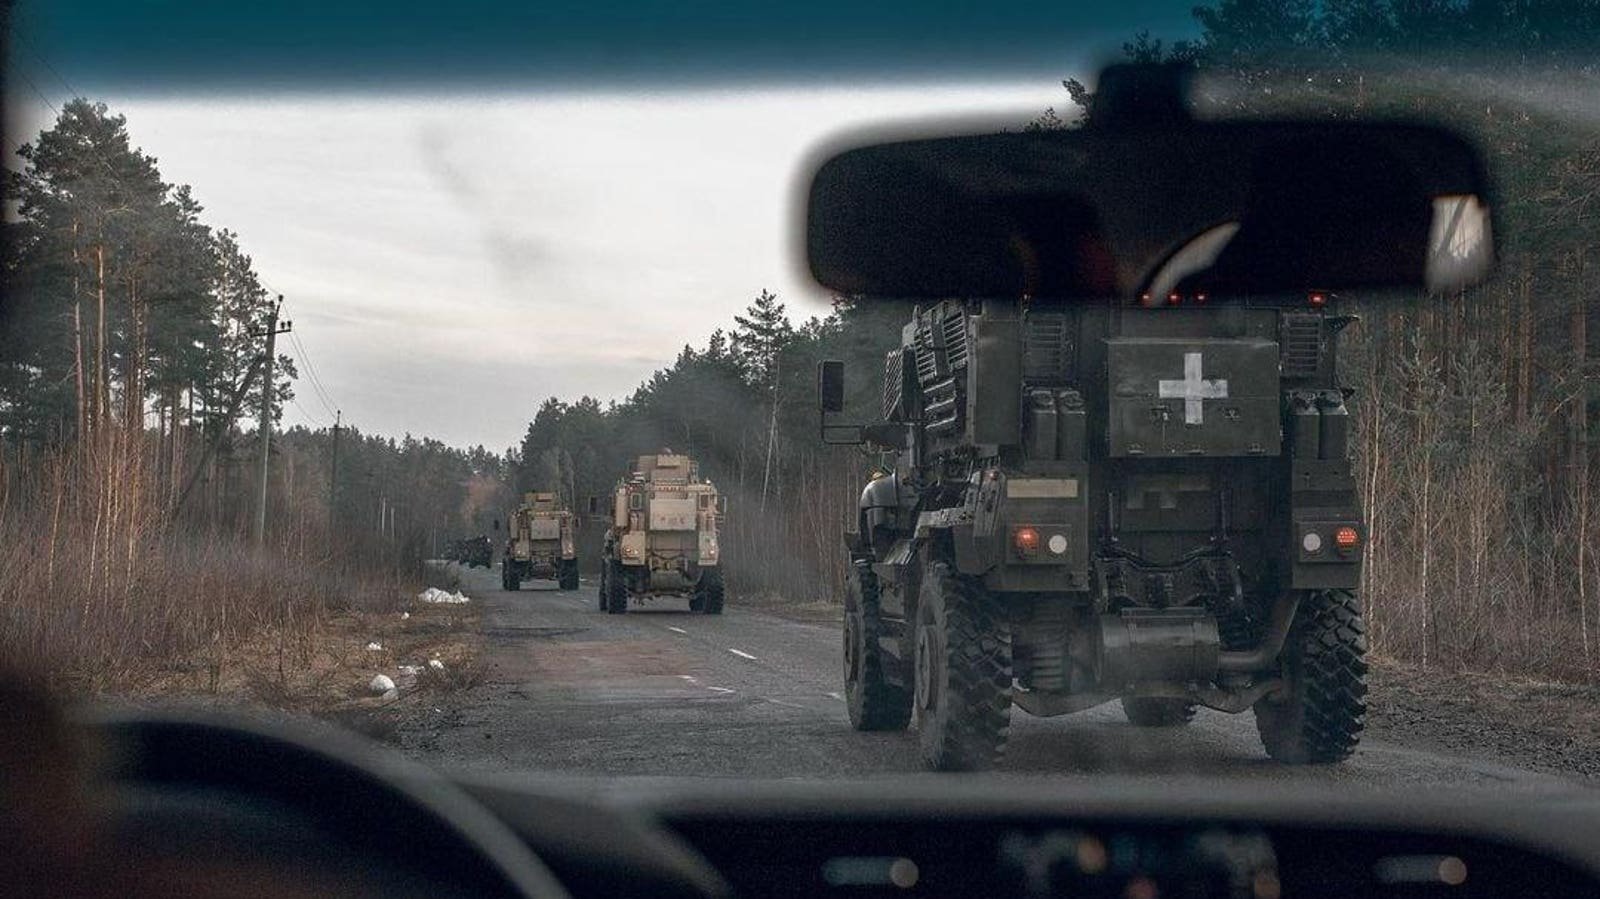 The Ukrainians Are Using Their MRAP Armored Trucks in Direct Assaults On Russian Positions